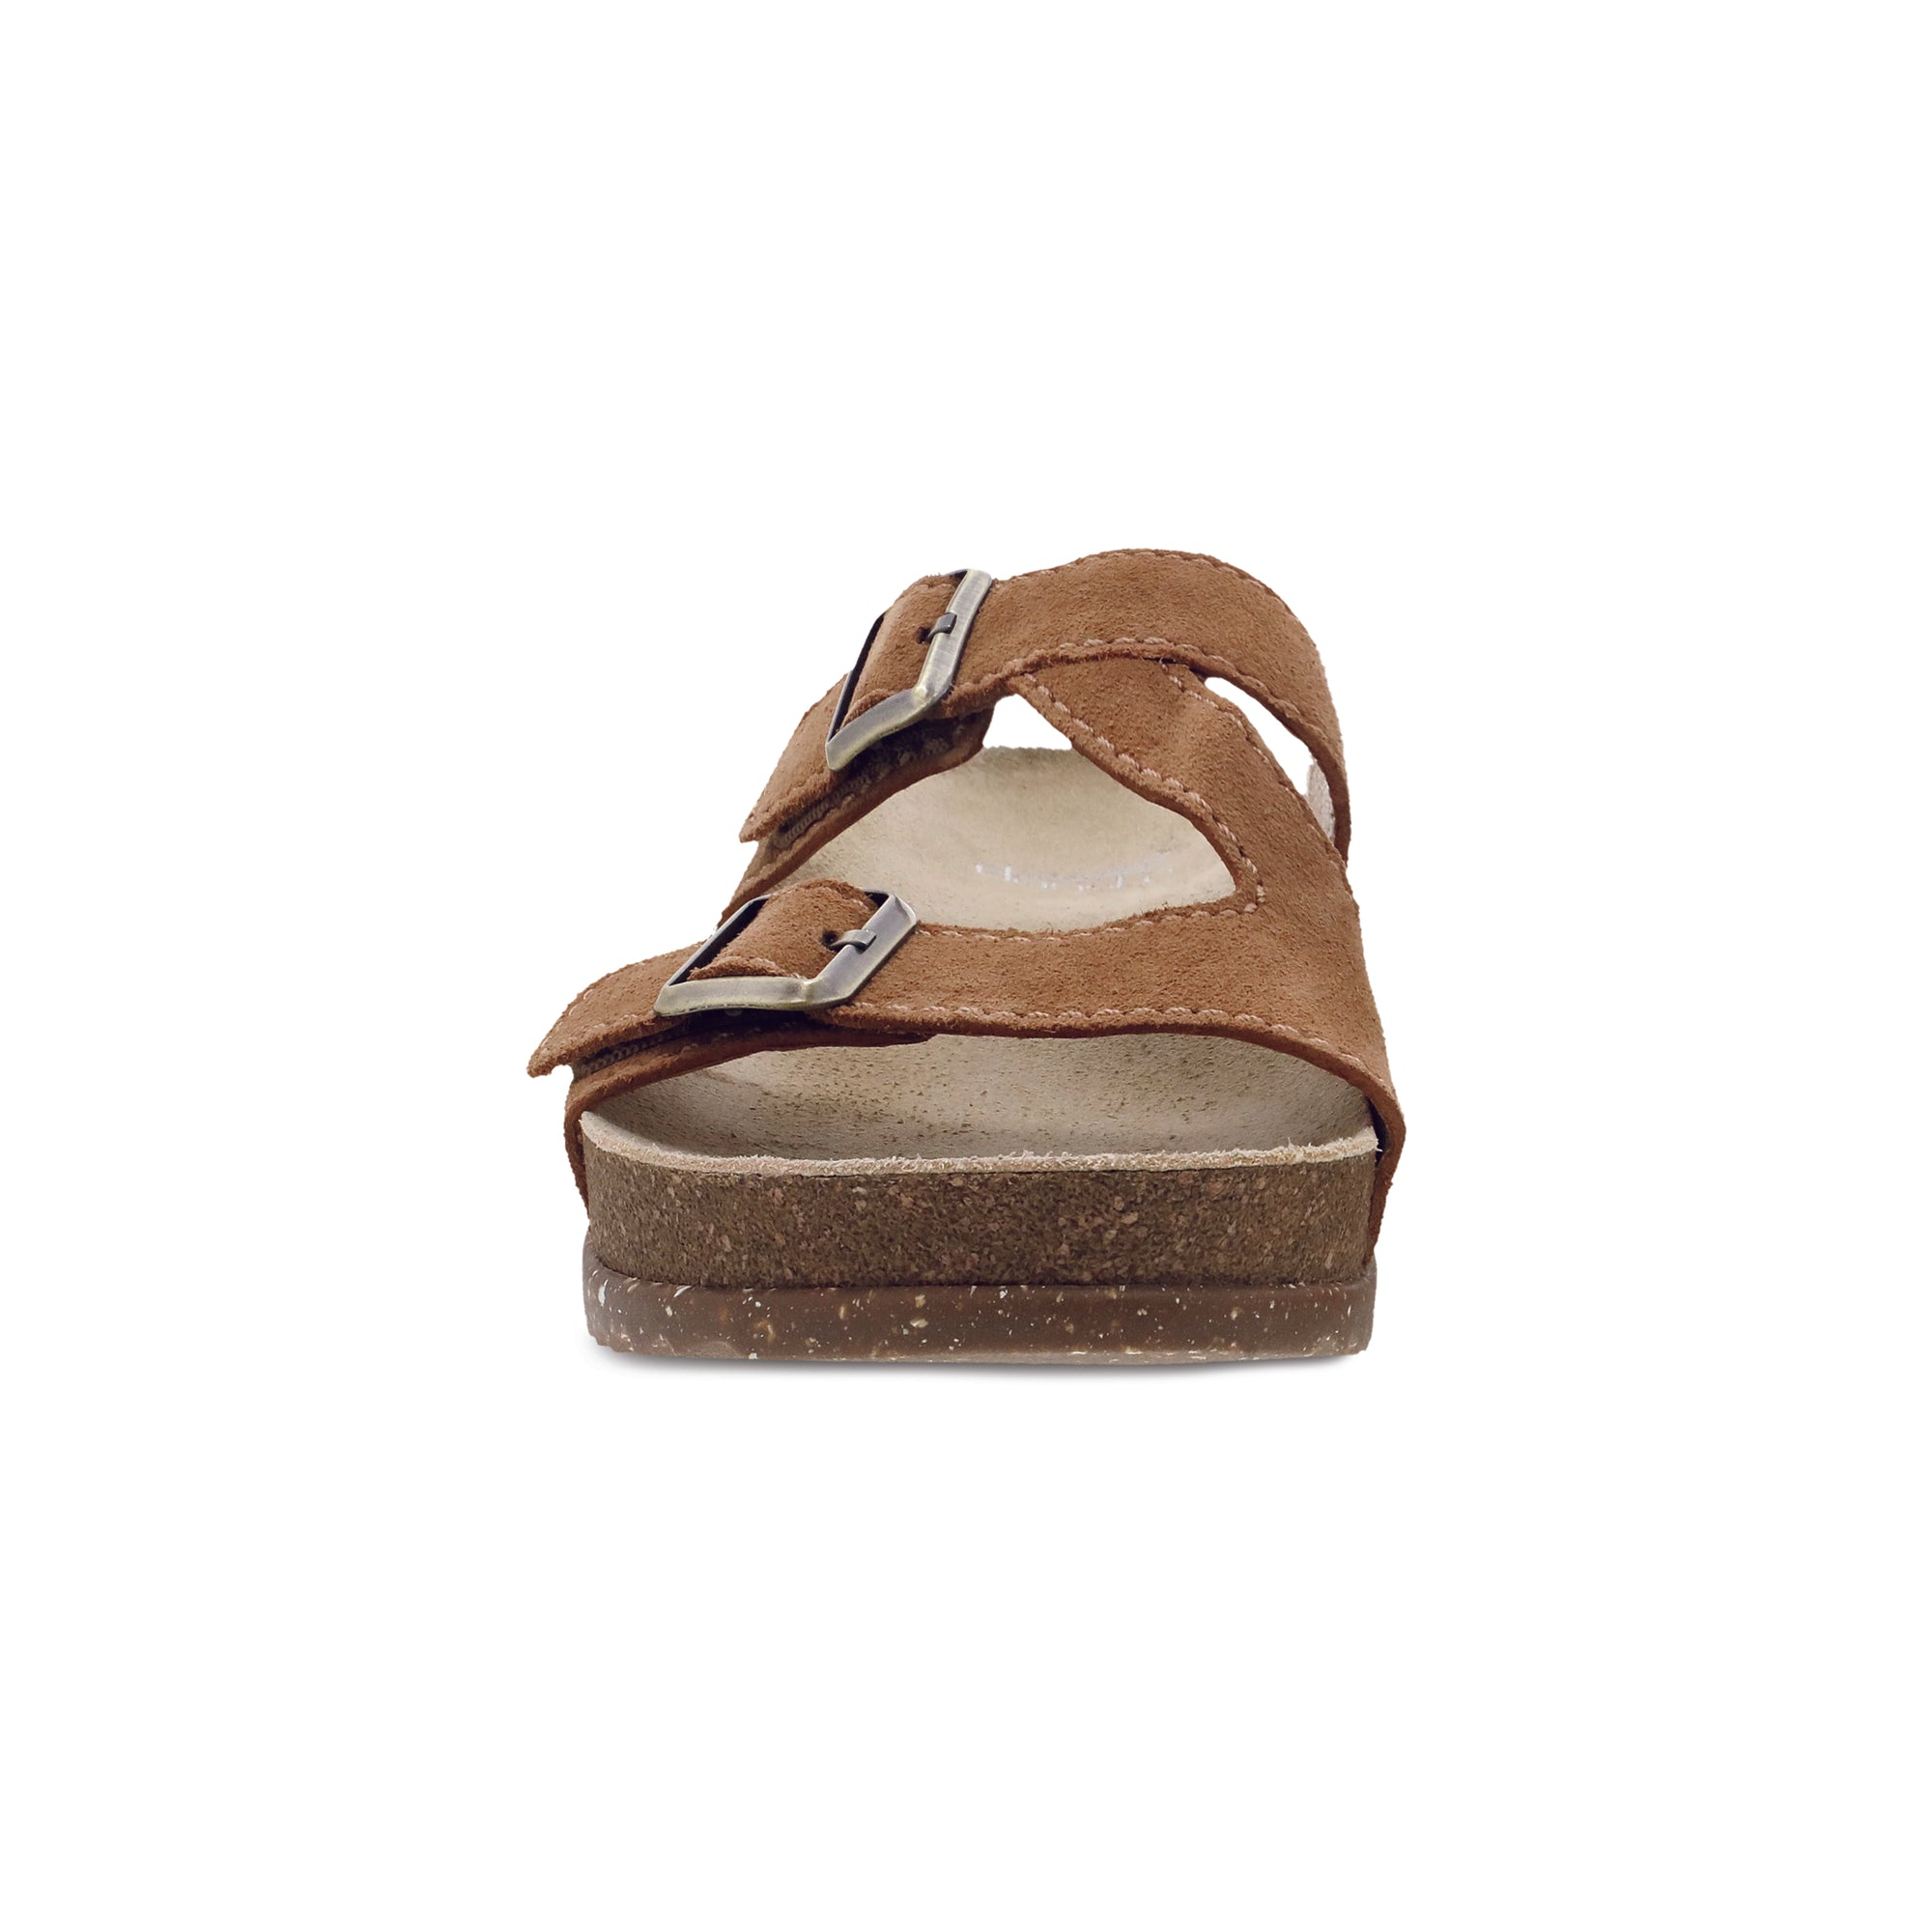 Toe image of Dayna Tan Suede